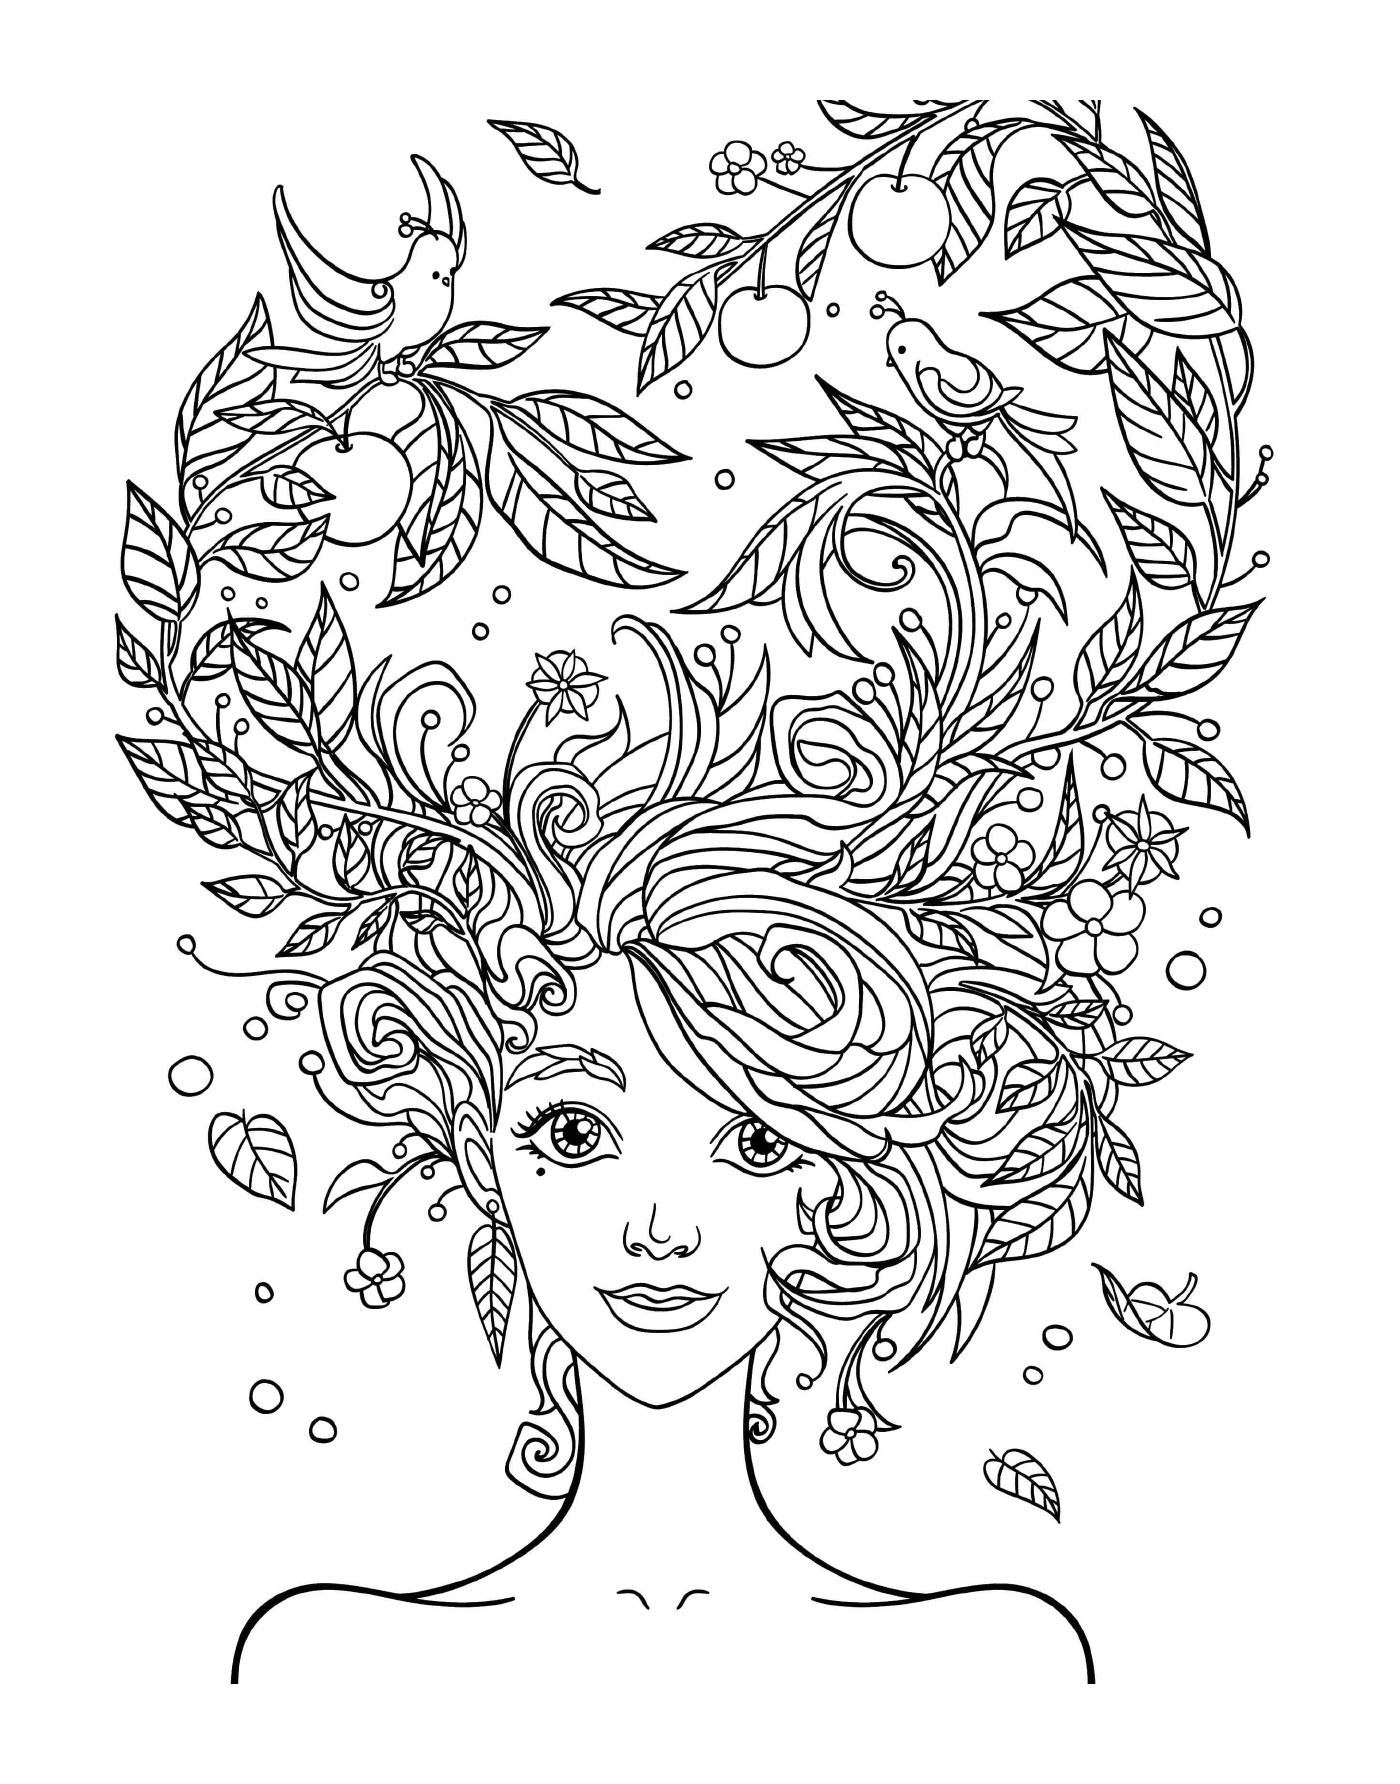  A woman's head with flowers in her hair 